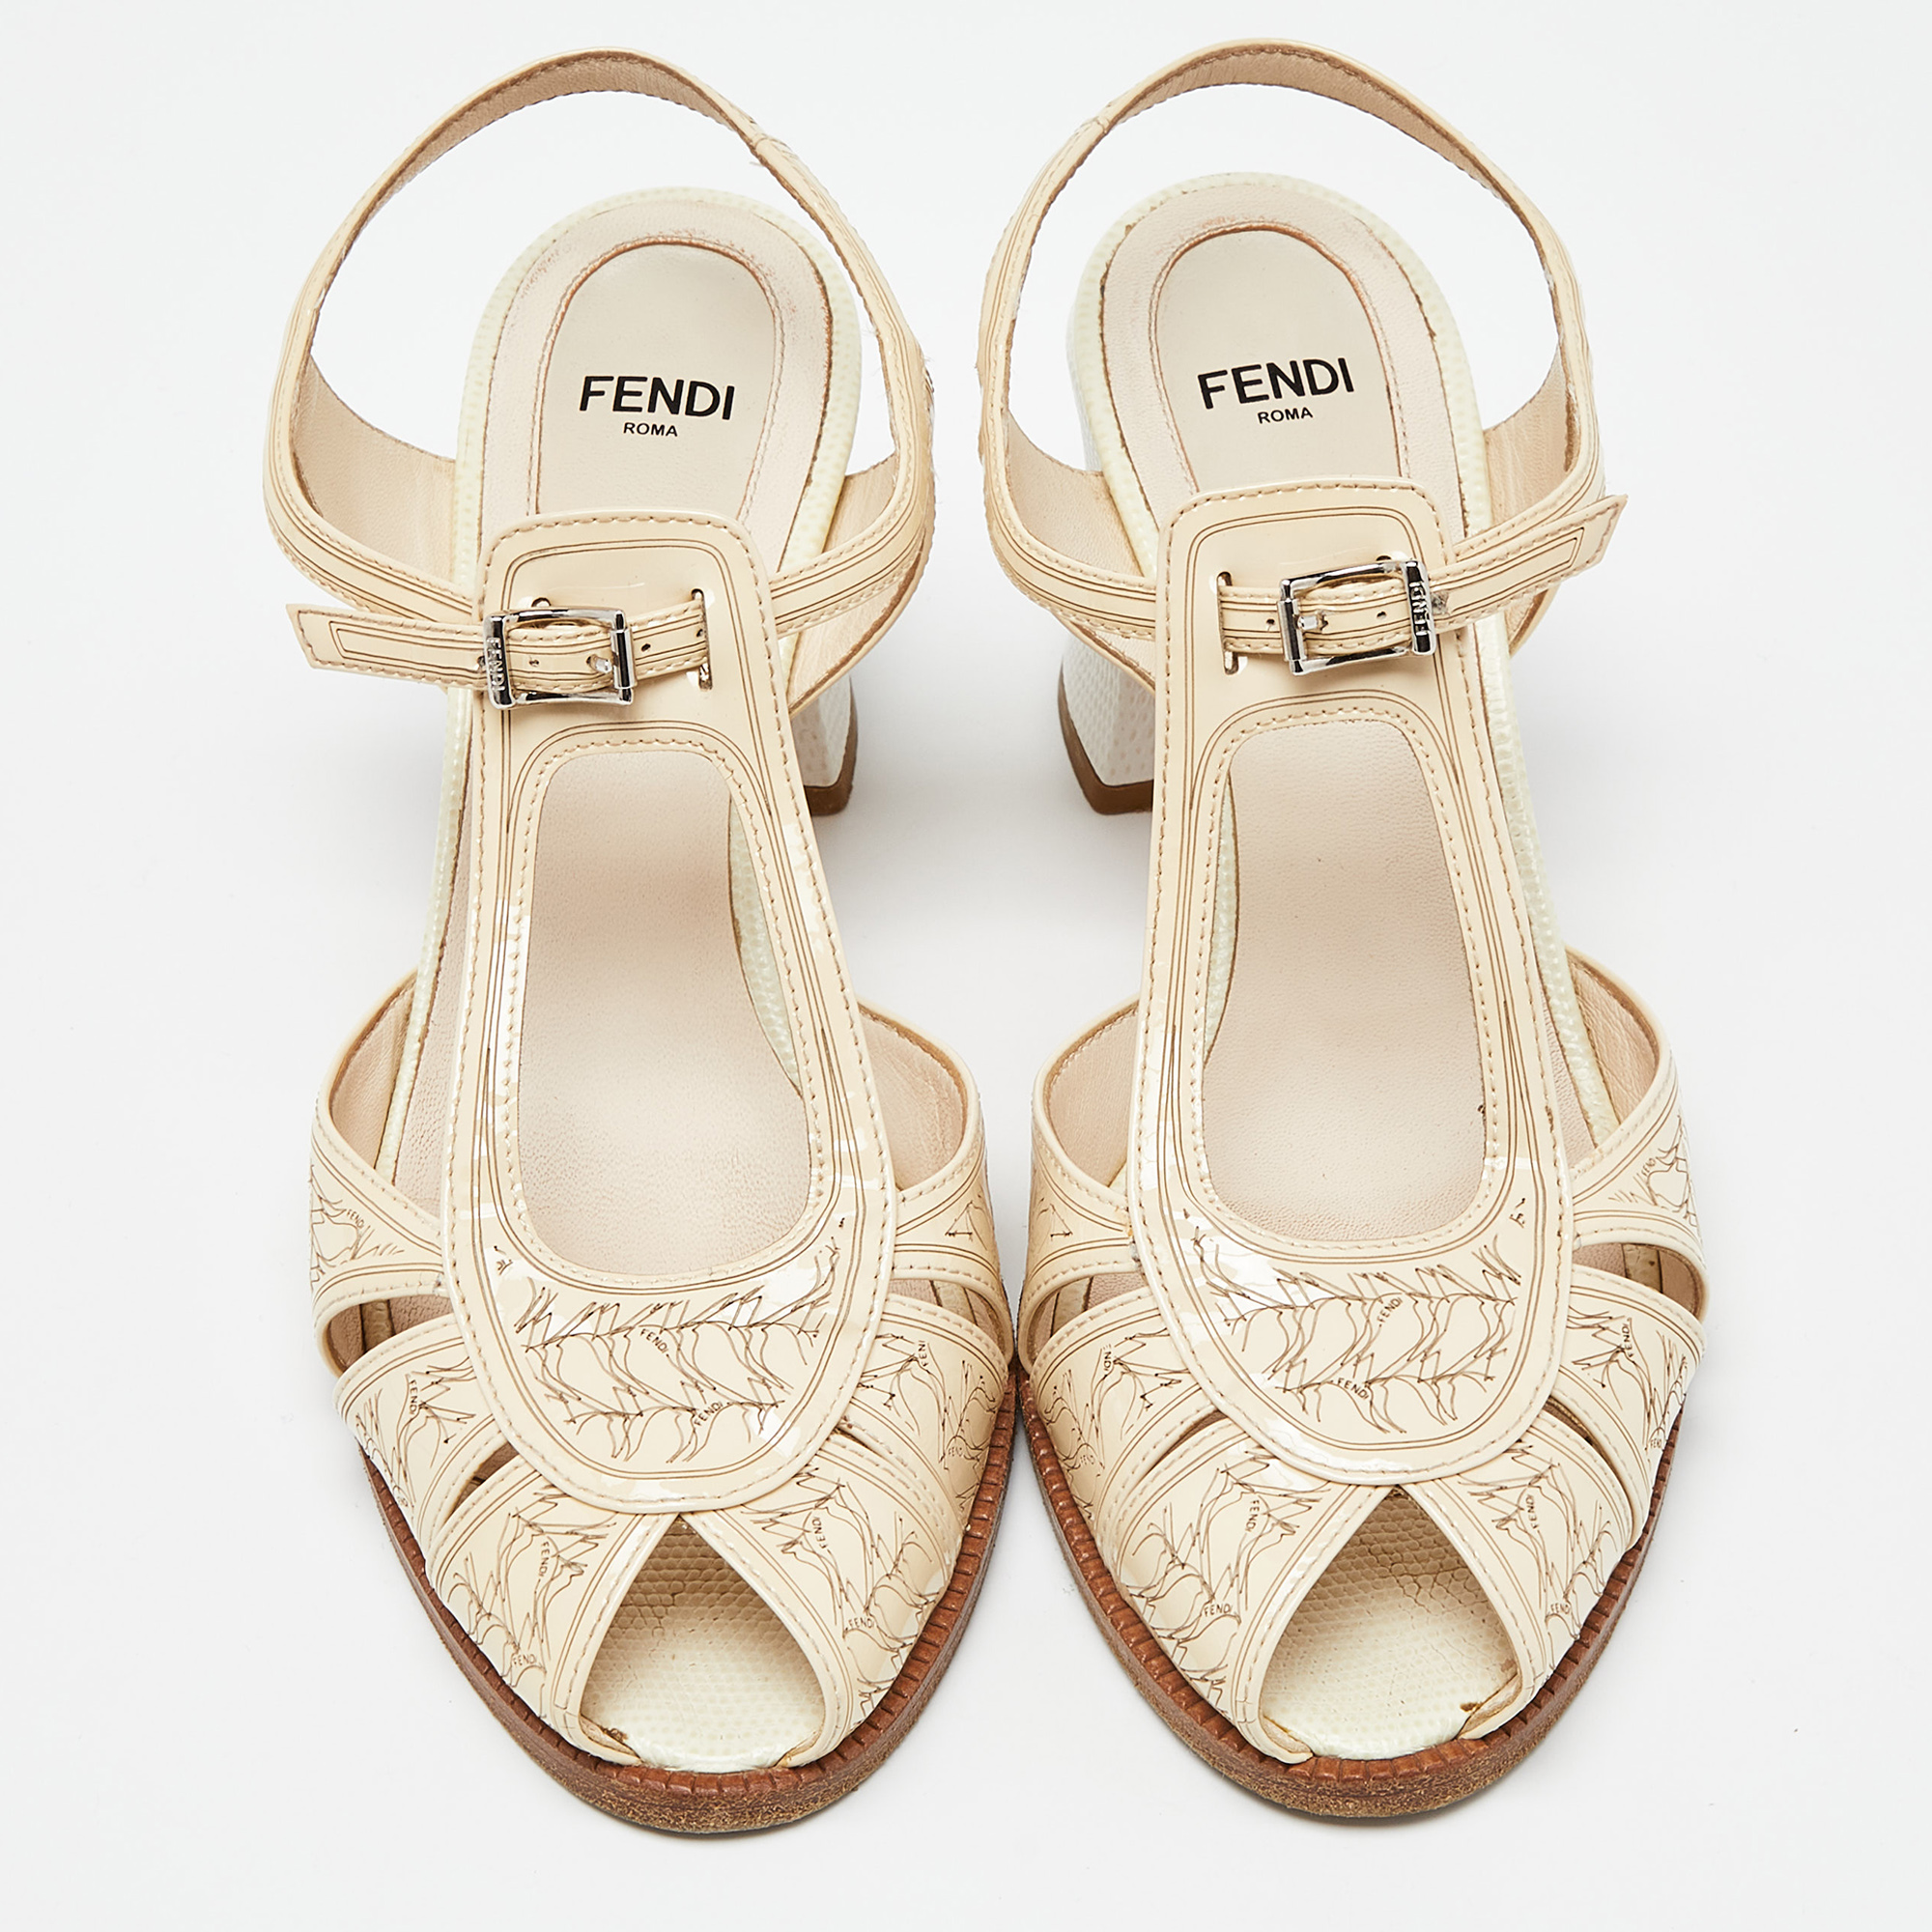 Fendi Beige Leather And Patent Leather Open Toe Block Heel Ankle Strap Sandals Size 38